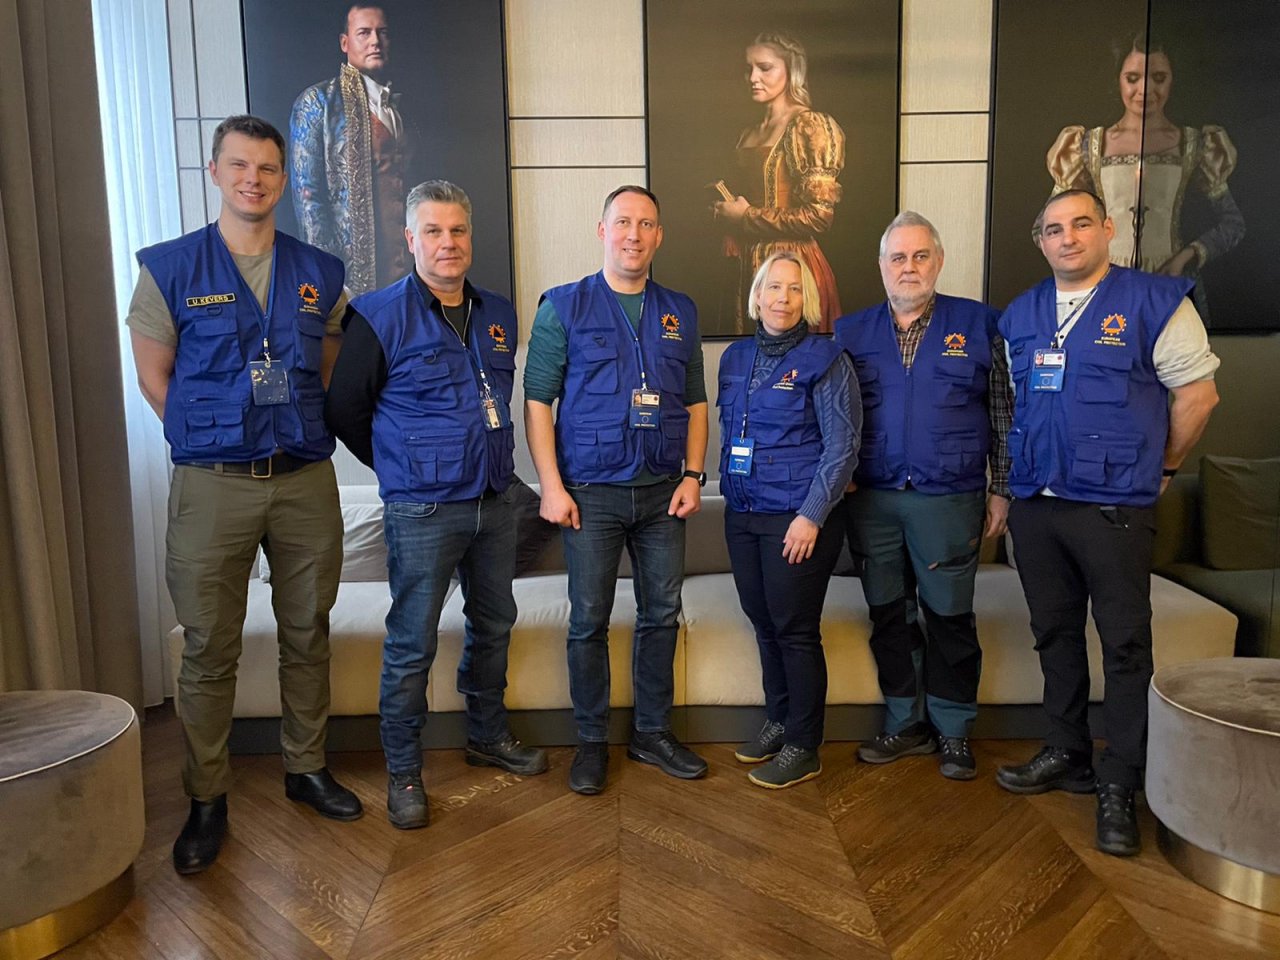 Employees of the State Fire and Rescue Service participate in the European Union Civil Protection Advisory Mission in Ukraine